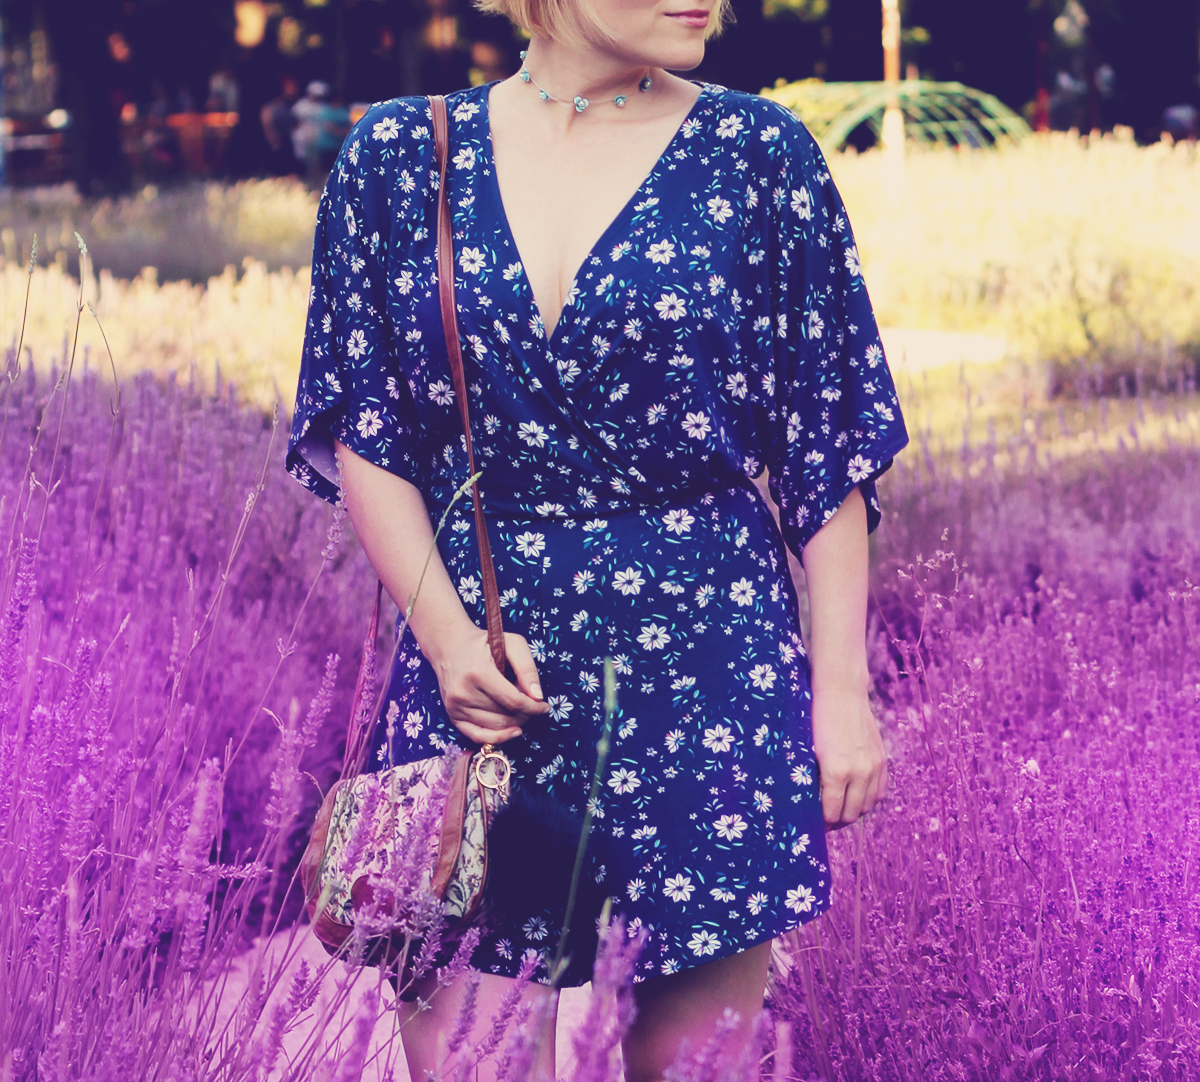 blue floral romper and choker in lavender